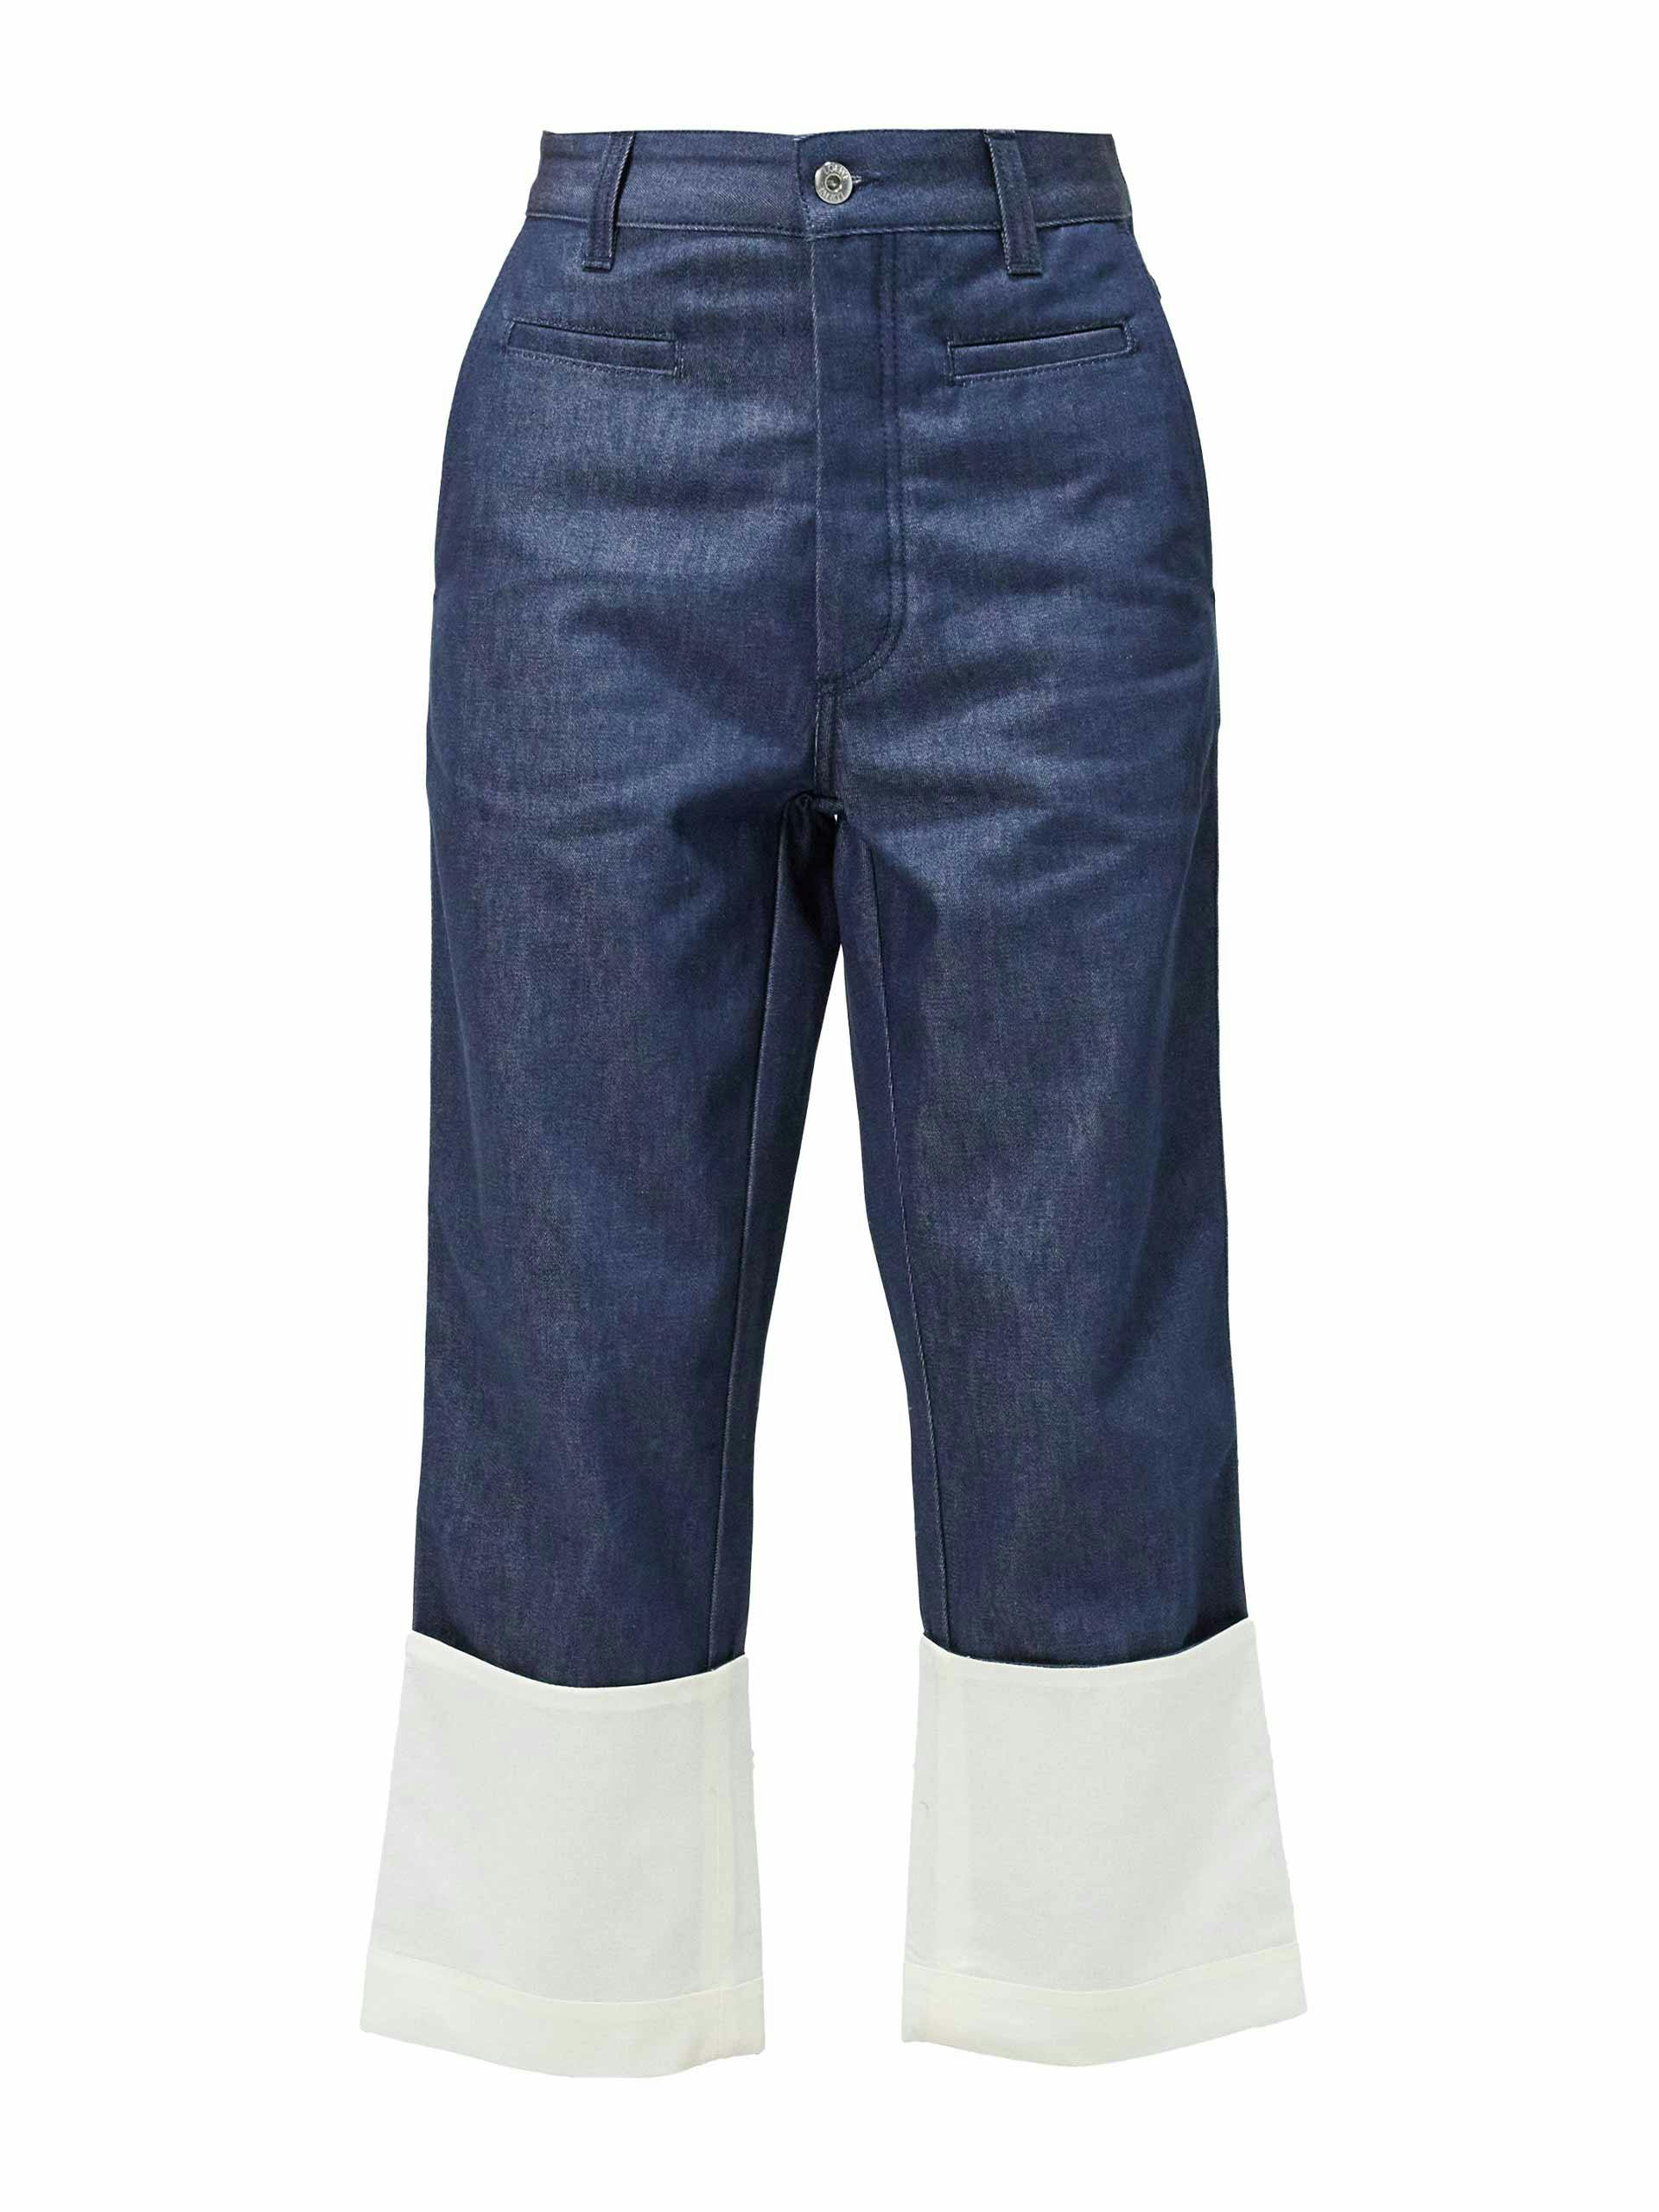 Fisherman cropped jeans